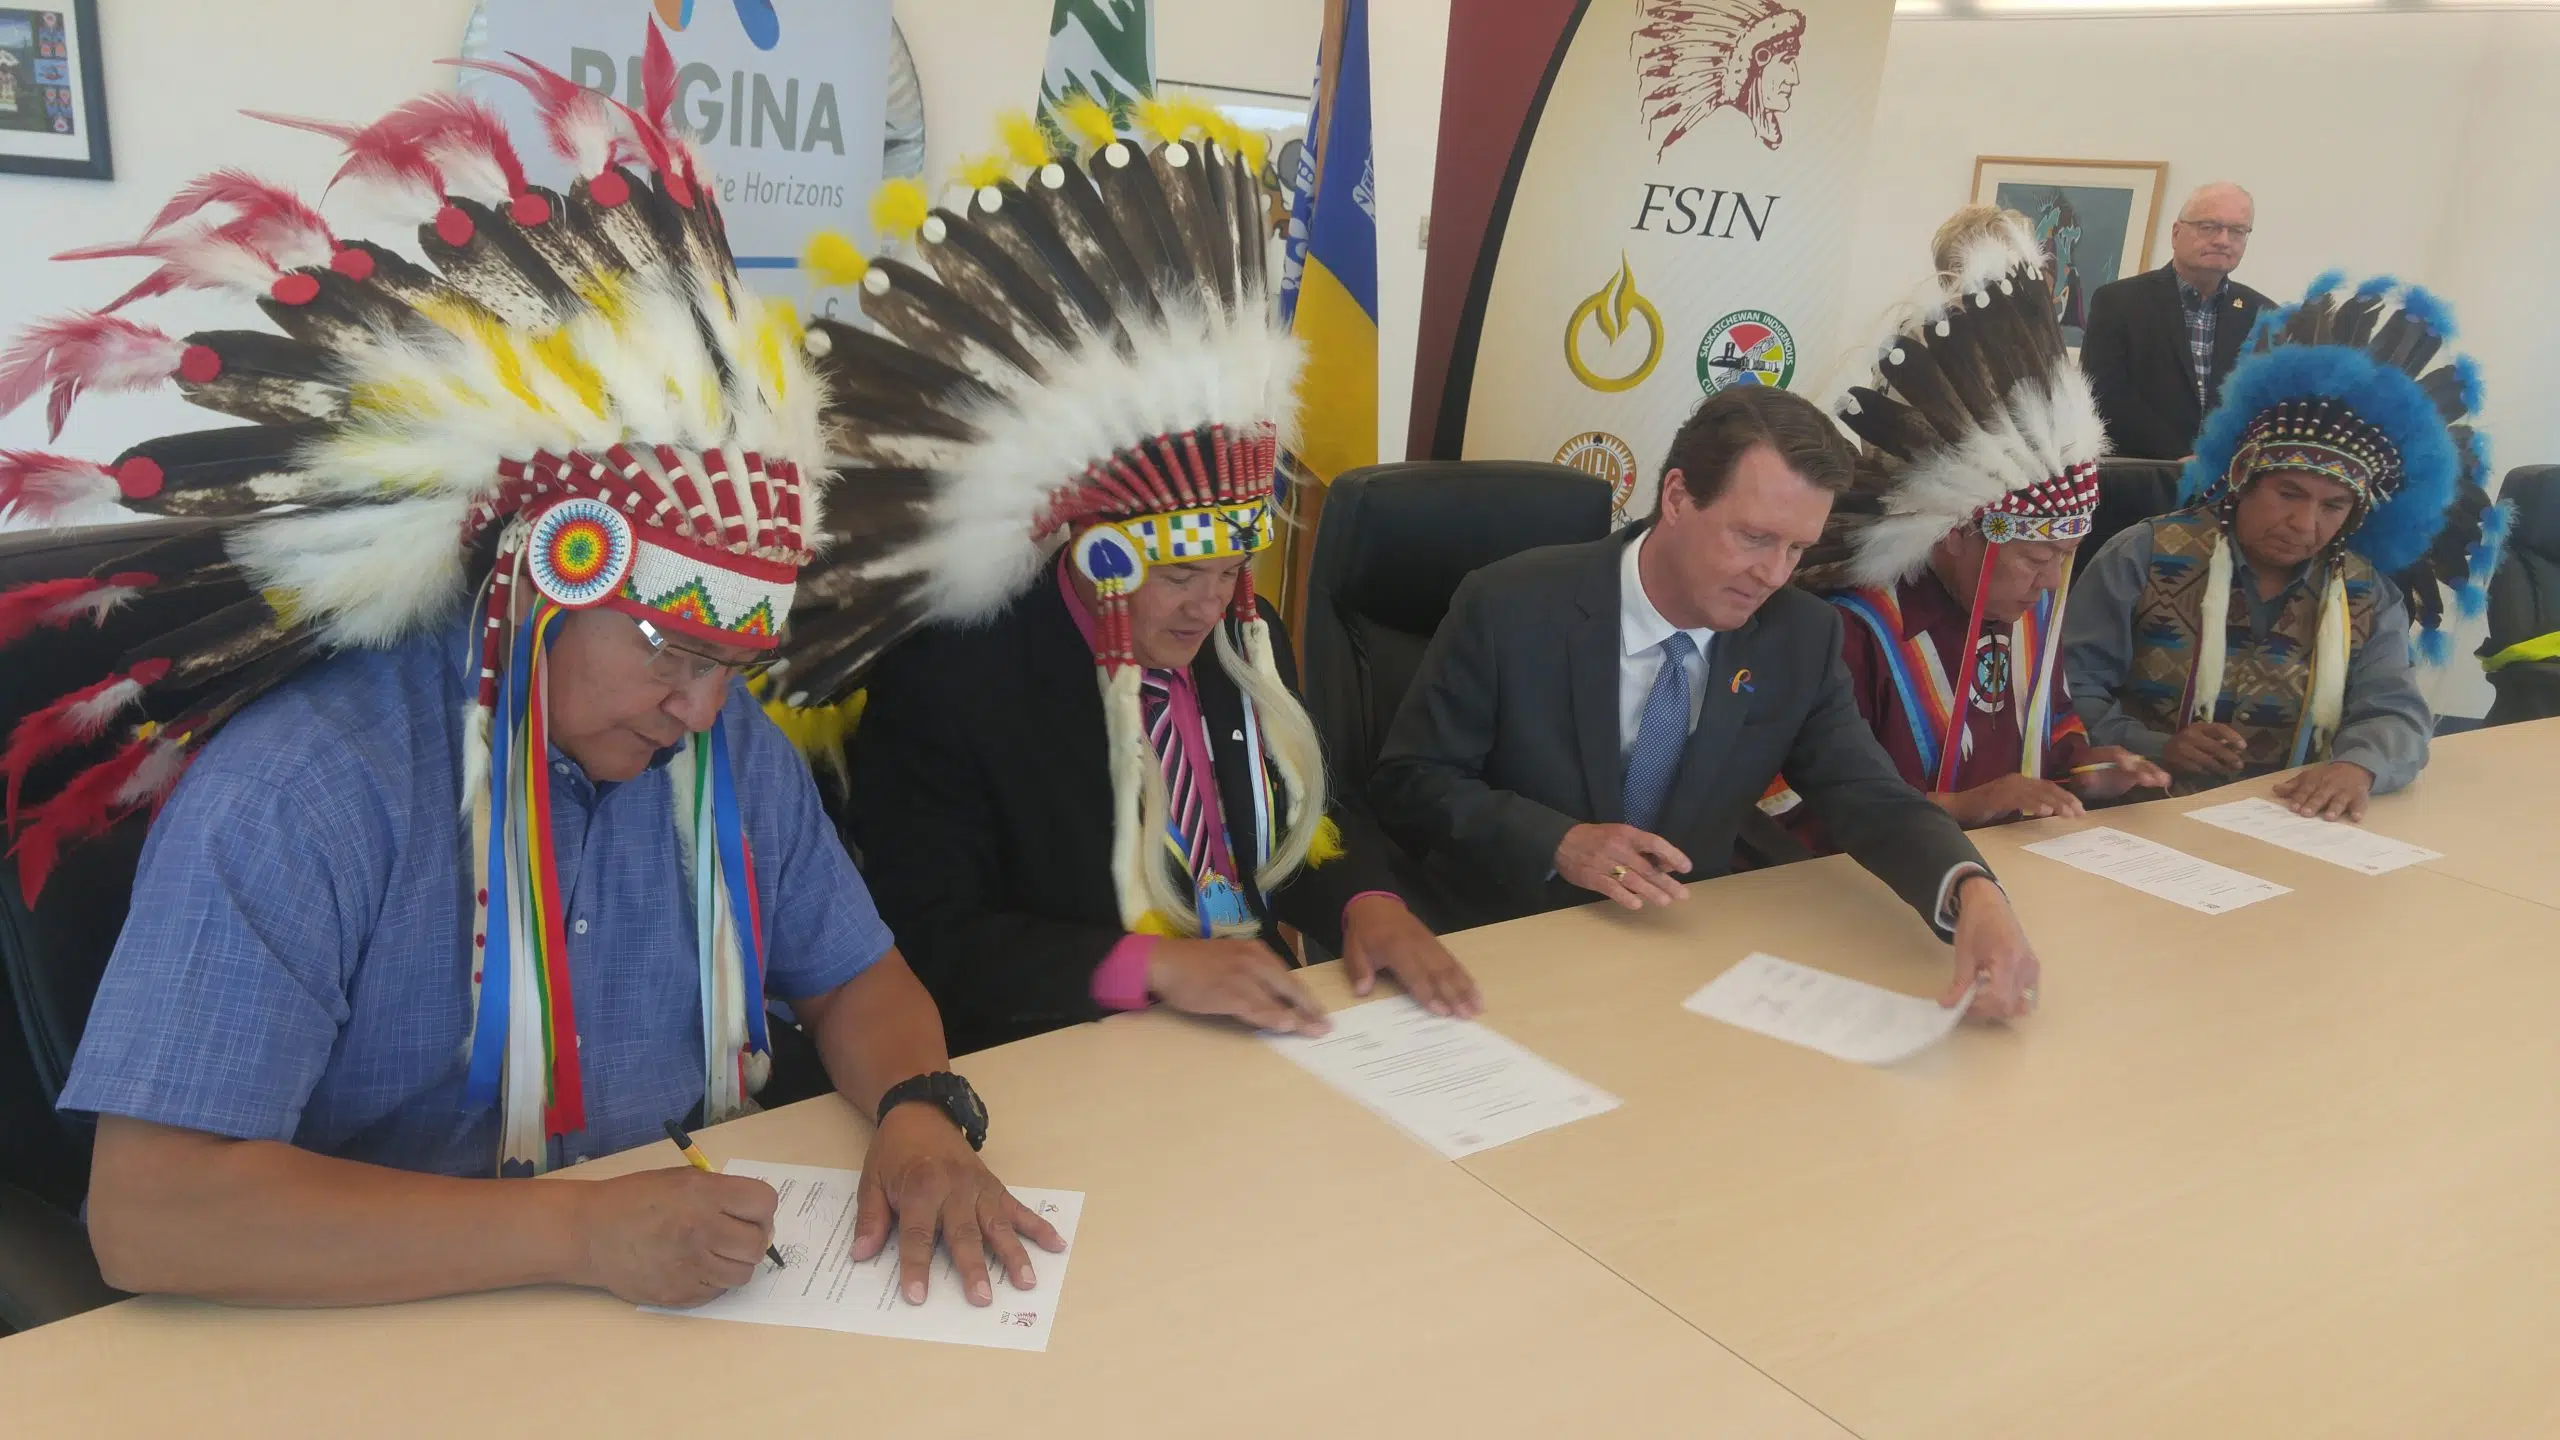 City of Regina, FSIN sign agreement to educate about racism